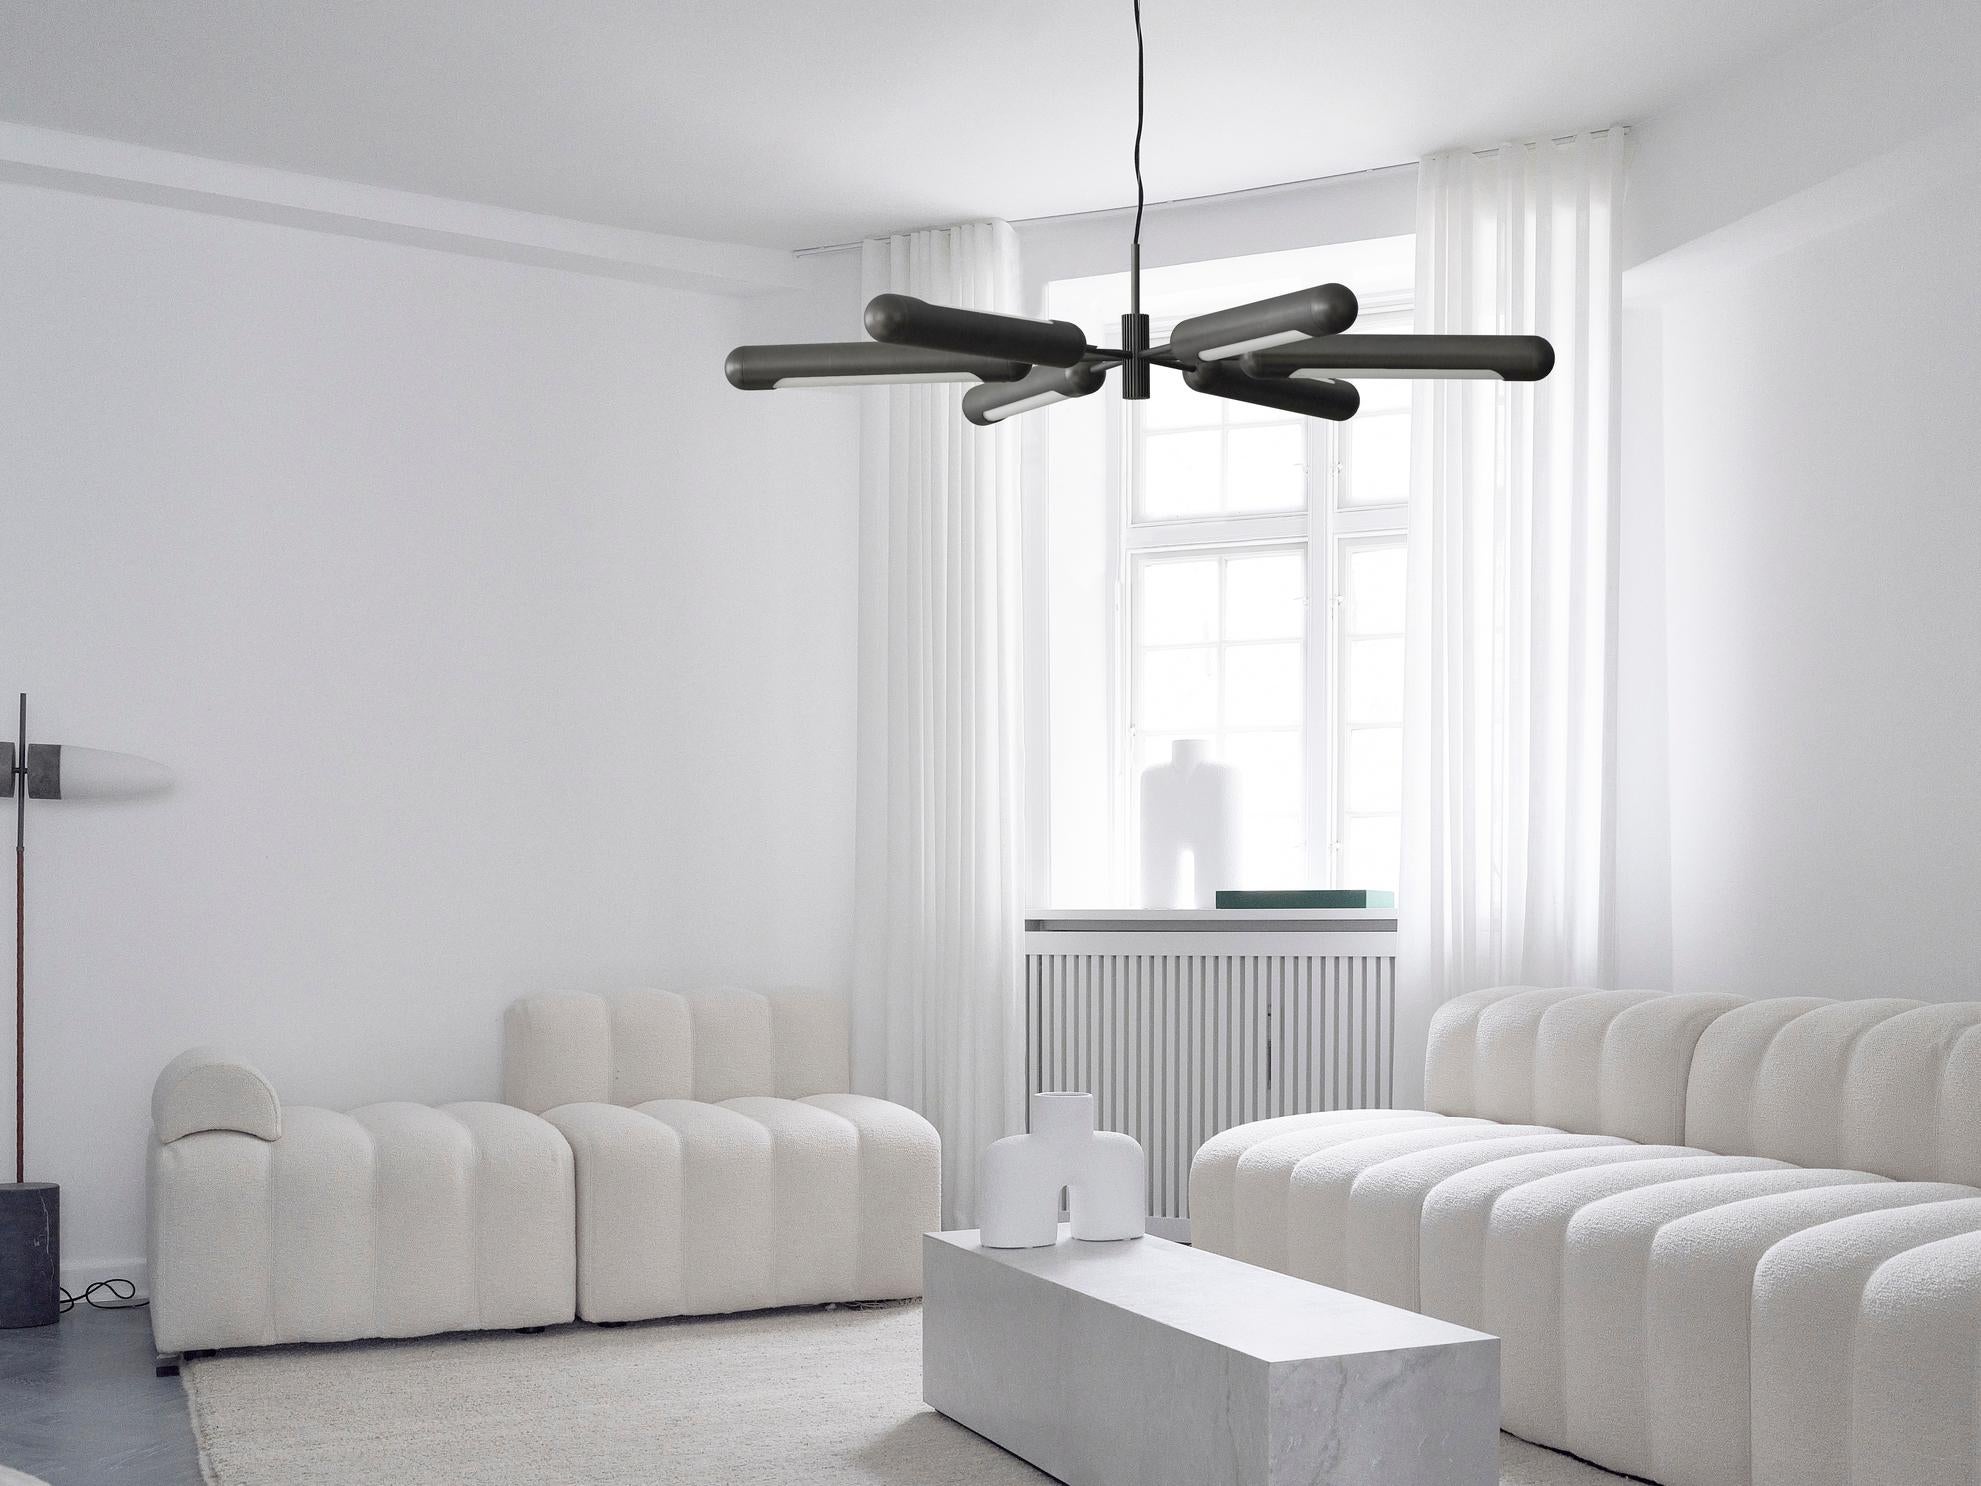 Bullet chandelier by 101 Copenhagen
Designed by Kristian Sofus Hansen & Tommy Hyldahl.
Dimensions: L 125 x W 125 x H 32 cm
Mounting plate: H1,3 / W5,5 CM
Ceiling cup: H19,5 / W6 CM
Fabric covered cable (divided in two):
Cable 1. from 15 to 85 CM /